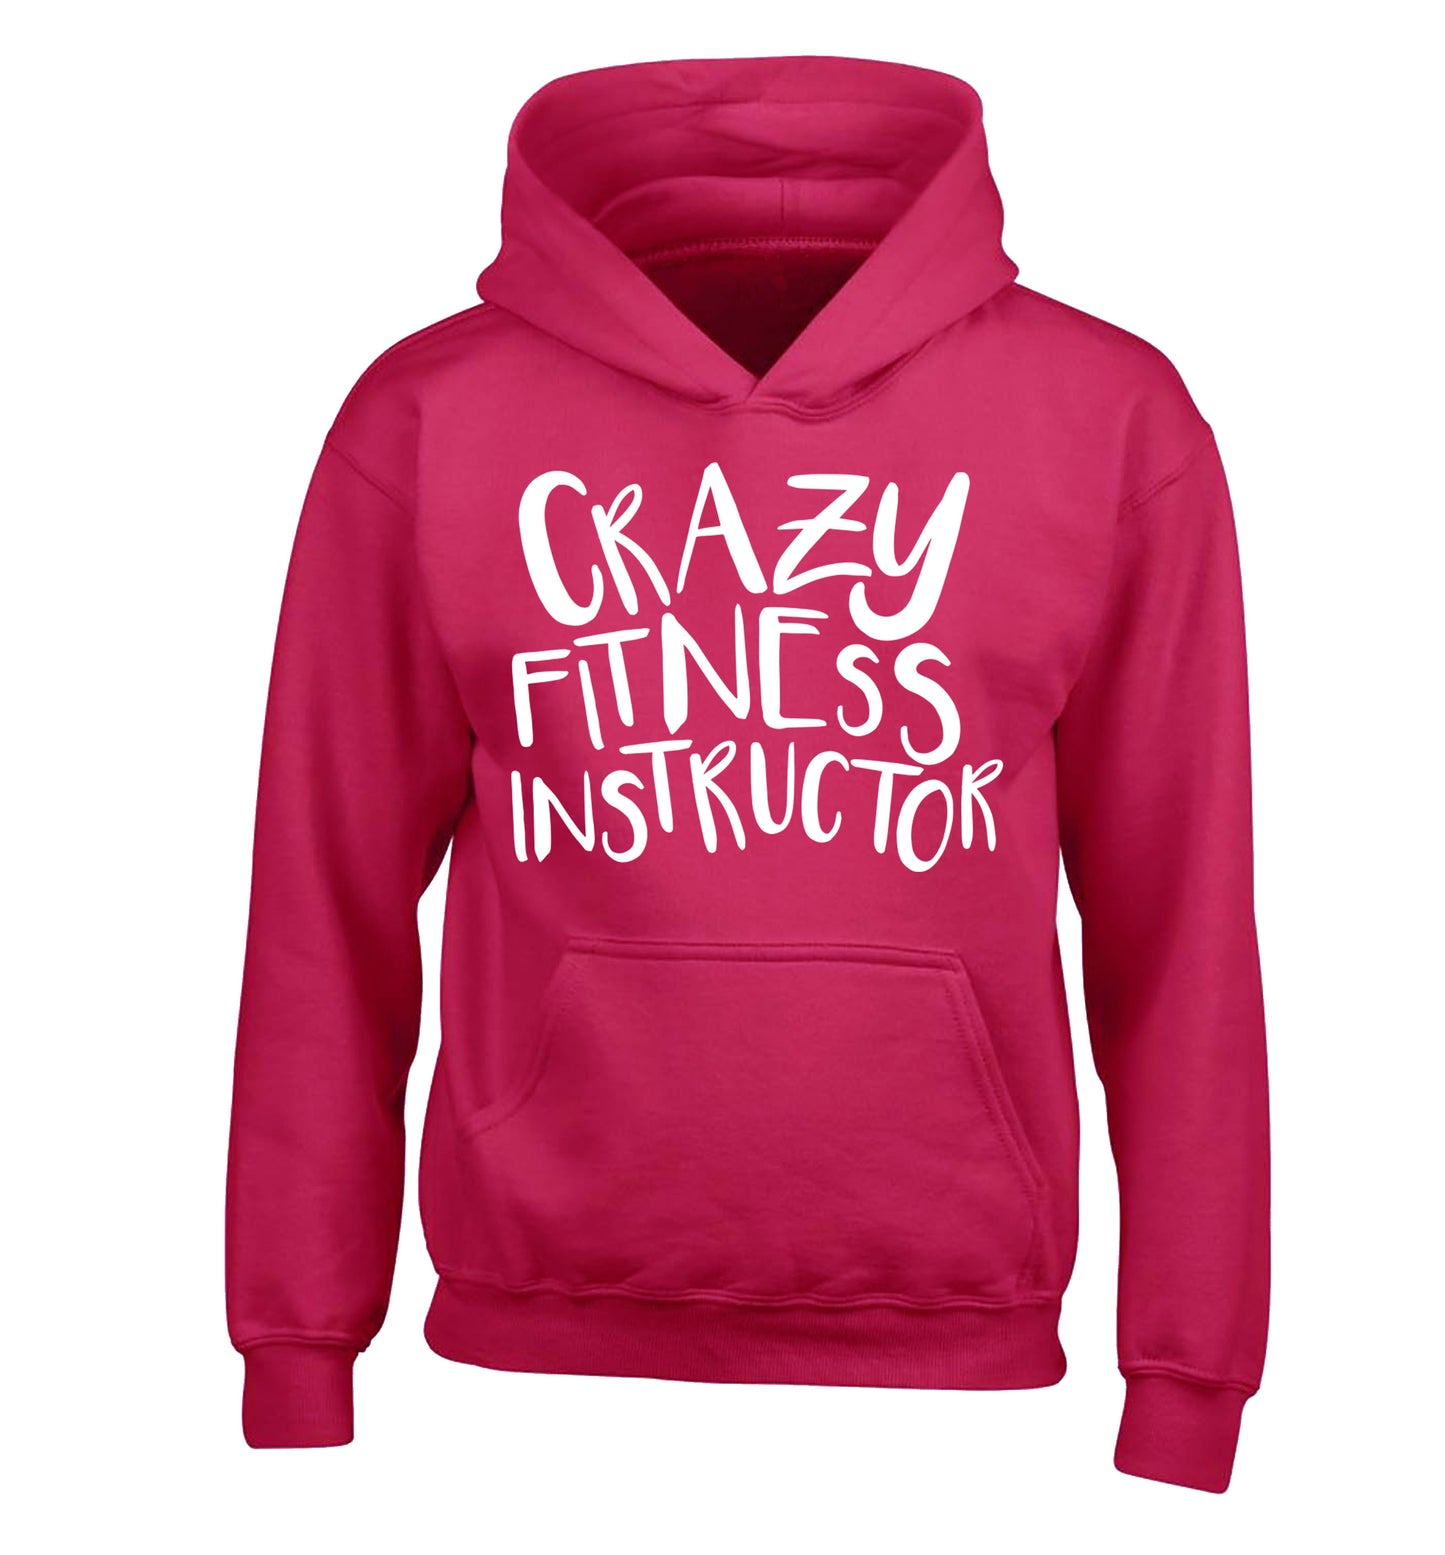 Crazy fitness instructor children's pink hoodie 12-13 Years